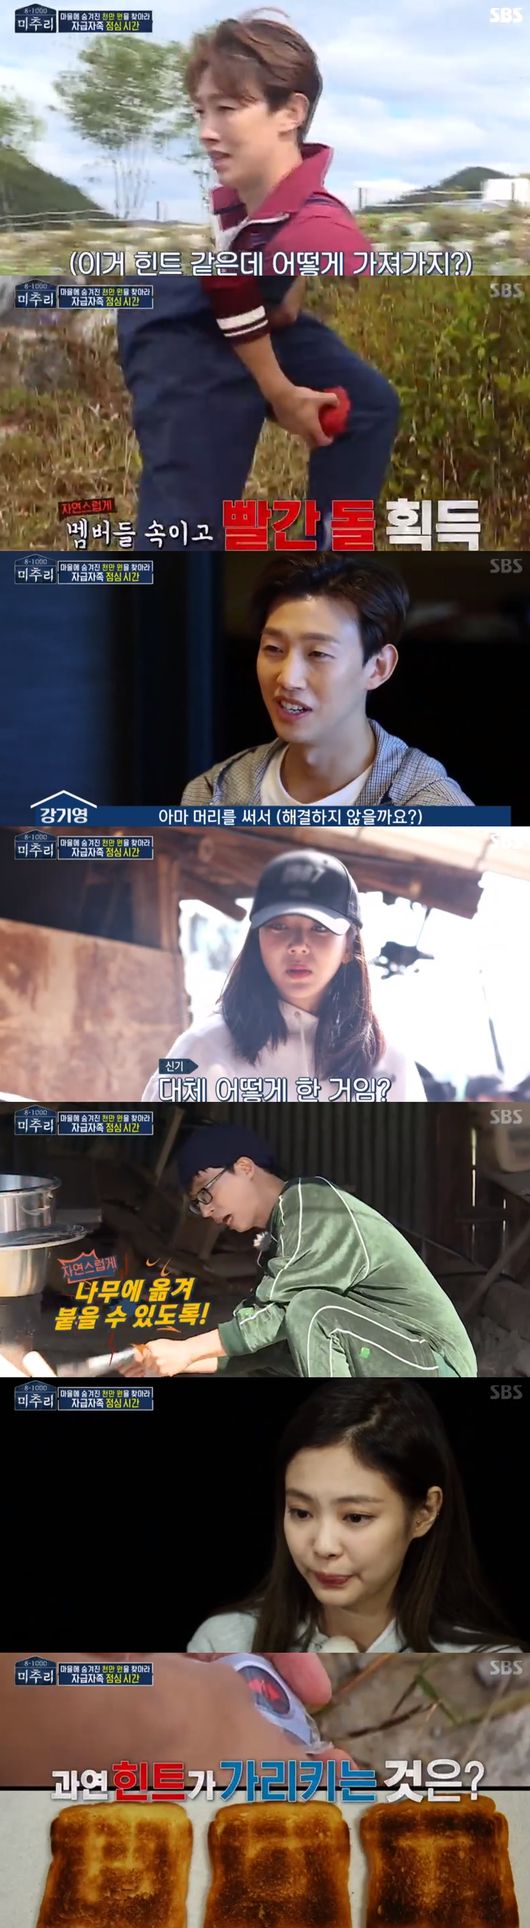 Its Yo Jae-Suk who believes and sees.The members chemistry was explosion and gave a big smile to Yo Jae-Suk and Jang Doyeon Yangse type Son Dam-bi, which is unbelievable that it was the first broadcast.SBS 6-part pilot Michuri 8-1000 was first broadcast on the 16th.Yoo Jae-Suk, Black Pink Jenny, Kim Sang-ho, Im Soo-hyang, Jang Doyeon and others24 Hours Country Mystery Entertainment, where stars track the mysterious secrets hidden in rural villages.Yoo Jae-Suk said, I was here first, I came to earnest, I was doing some work in the meantime.We will be living an isolated life, we have thoroughly controlled this town, and it is impossible to meet with managers and stylists, he explained to the members.He also demanded that everyones bags be returned and said, All the cookies are confiscated.Yoo Jae-Suk explained the mission to the members: We had to find the money cloth hidden in Michuri; the items that the members had taken in advance were hints that helped us find the cloth.If you find a thousand if you can take it completely without distributing it with your agency.Son Dam-bi said, Is it personal play? And Its all enemies. On the other hand, Kim Sang-ho laughed in contrast, saying, When do you eat rice?Self-sufficient lunchtime: Son Dam-bi dug vegetables in the field and asked Songgang, What do you want to do if you have a thousand if you have one? Songgang replied, I want to eat beef.Kim Sang-ho and Jang Doyeon went to pick up sweet potatoes and found a hint of red stone in the field.Kang Ki-young found a red stone while fishing in the river, cheating other members and sneaking up on the red stone, saying he left his watch.Kang Ki-young broke the stone with a red hammer - it contained an elevator opening button.However, the other members were watching Kang Ki-youngs actions and caught the hint.Kang Ki-young said, But I used it in such a stupid, public place, a hint that only I can get...Jenny found the toaster in the kitchen while preparing for the meal, baked the bread and found a hint: the word H O T was written on the baked bread.There was no one who was good at preparing lunch, cooking, and Yo Jae-Suk shouted, If this is the case, order lunch.After barely finishing the meal at the end of the twists and turns, a game for hint tools began: Yoo Jae-Suk asked, Ive dated an entertainer.Everyone was embarrassed and Jang Doyeon responded with audaciousness, saying, Its not embarrassing without it.The second question was: I farted while filming today: Jang Doyeon frankly Confessions that he feeded too much sweet potatoes.Here, Yang Se-hyung continued to tease Jang Doyeon as a fart and laughed.Jang Doyeon said, I will show you my pants popping in the morning tomorrow morning.At the start of the game, he played a volleyball game, but Jang Doyeon did not continue to play, so Son Dam-bi, a team, Explosioned his anger.Yang laughed when he said, Is this Sister crazy for a thousand if. Jang Doyeon was a volleyball hero.Yoo Jae-Suk also shouted Exercise really doesnt work.After a close race, the two-headed Jang Doyeon Son Dam-bi Kim Sang-ho team won the salam volleyball; they said they copied Kang Ki-youngs hammer.Four mutual teams have won the hammer.Kim Sang-ho then sneaked into the mens room and checked the remote control, a hint tool; Kim Sang-ho had a hint of aprilSBS 6-part pilot captures screen of Mictury 8-1000